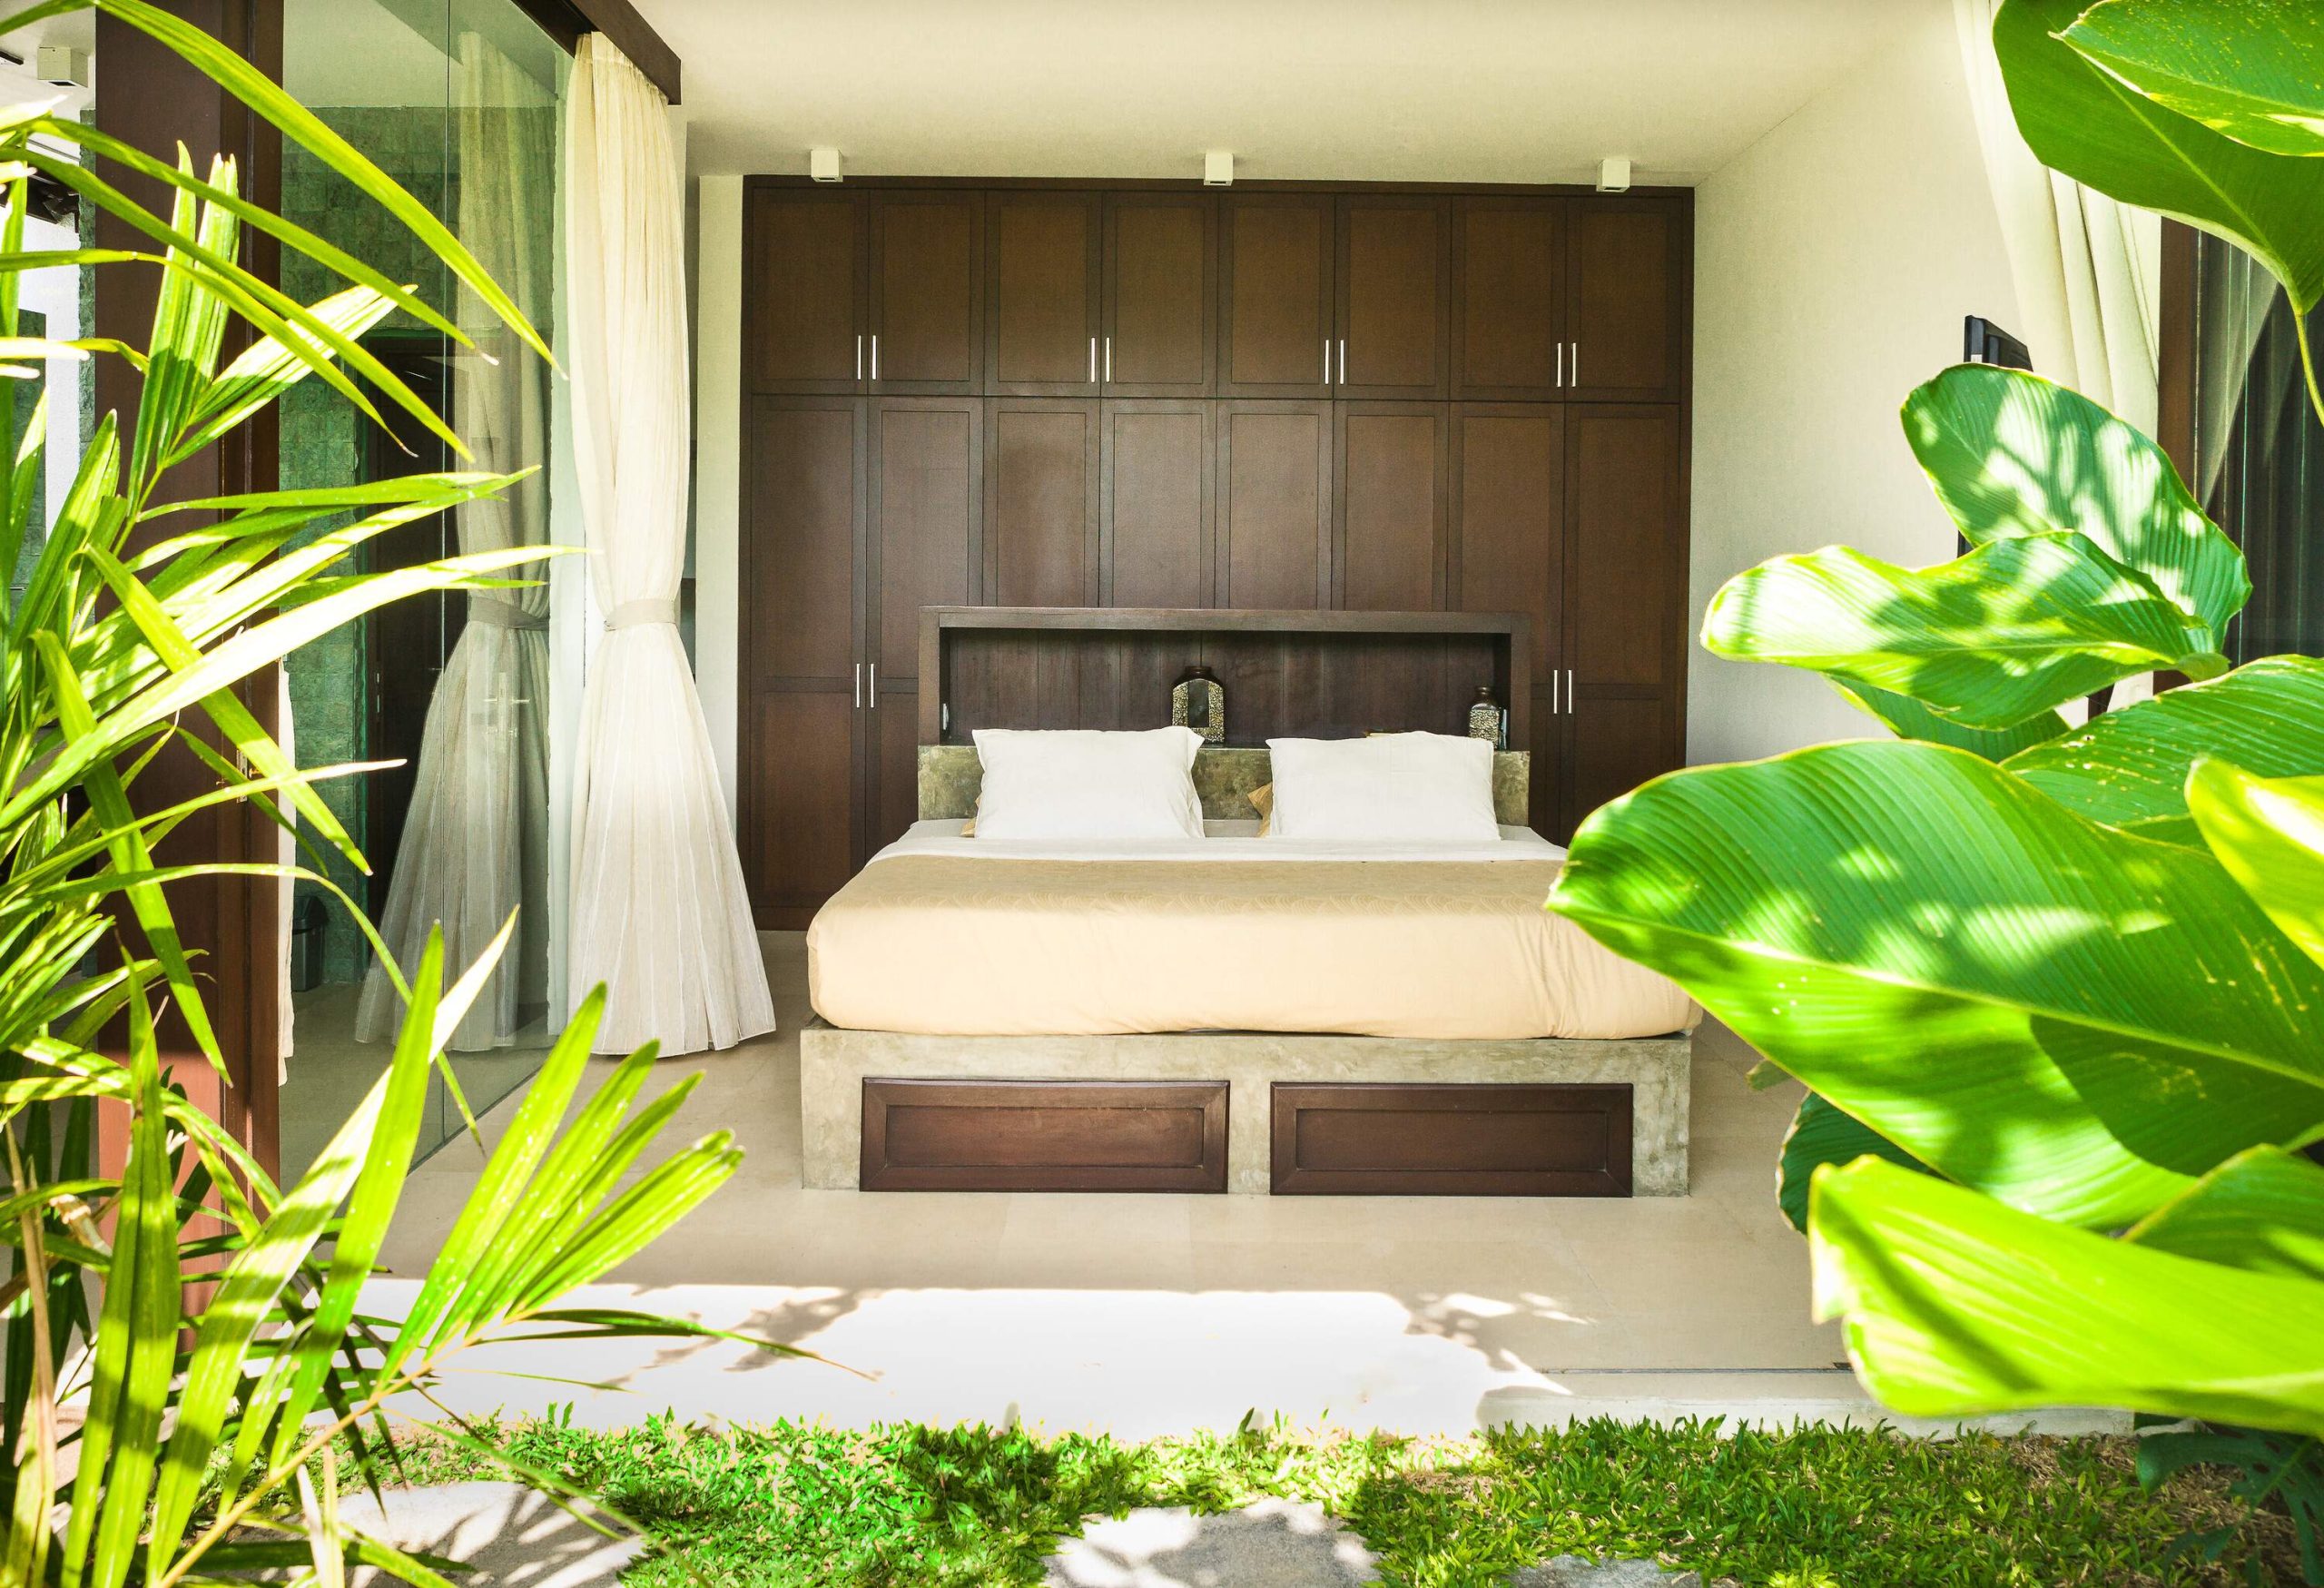 A bed in a room with open doors that leads to a garden with lush plants.